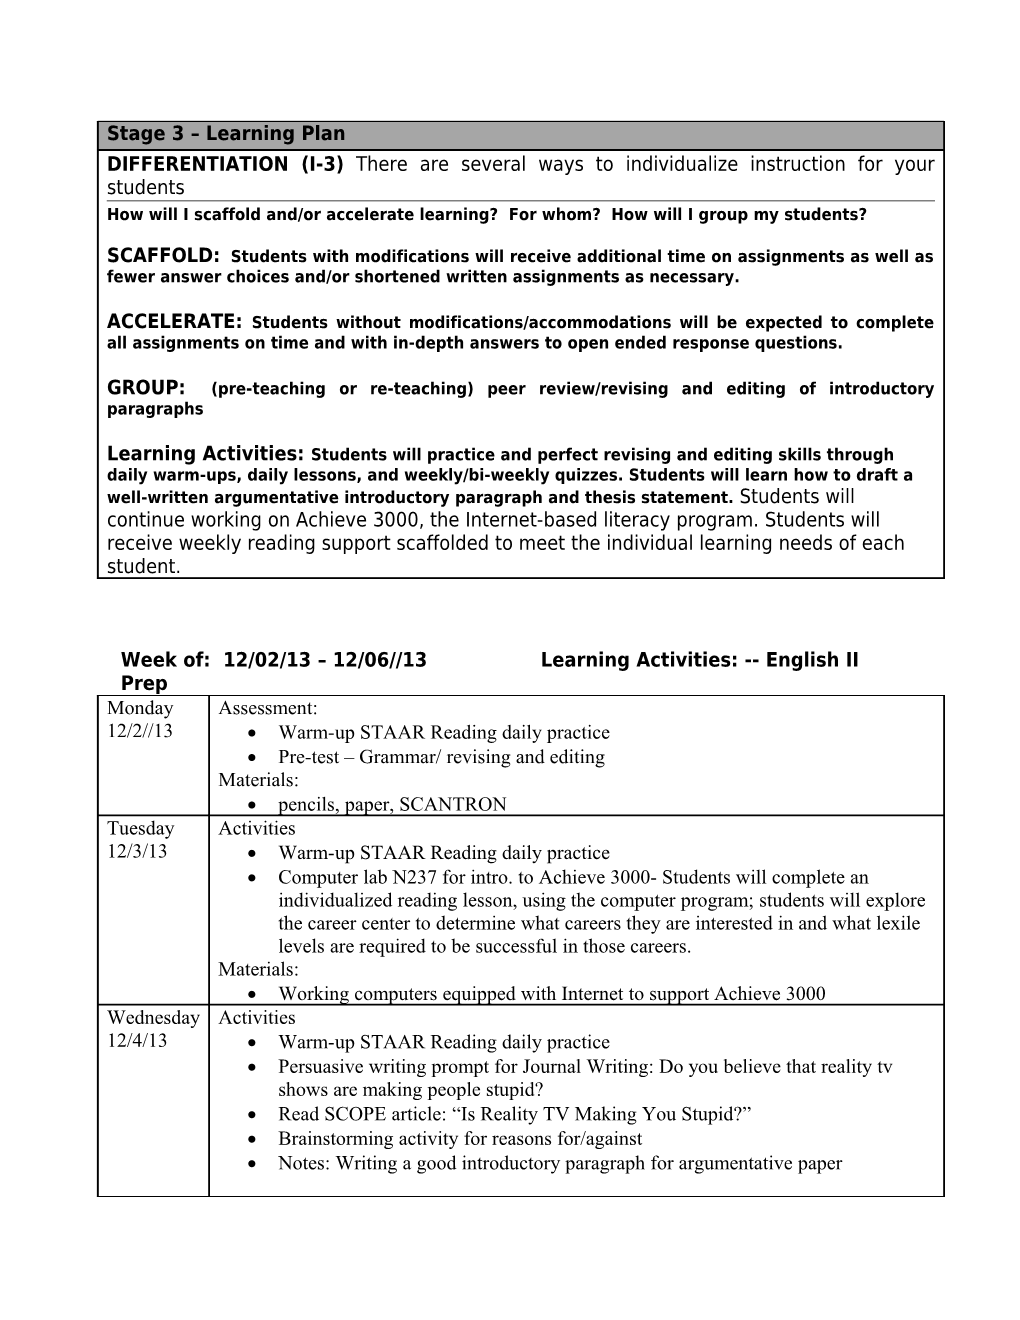 Stage 3 Learning Plan